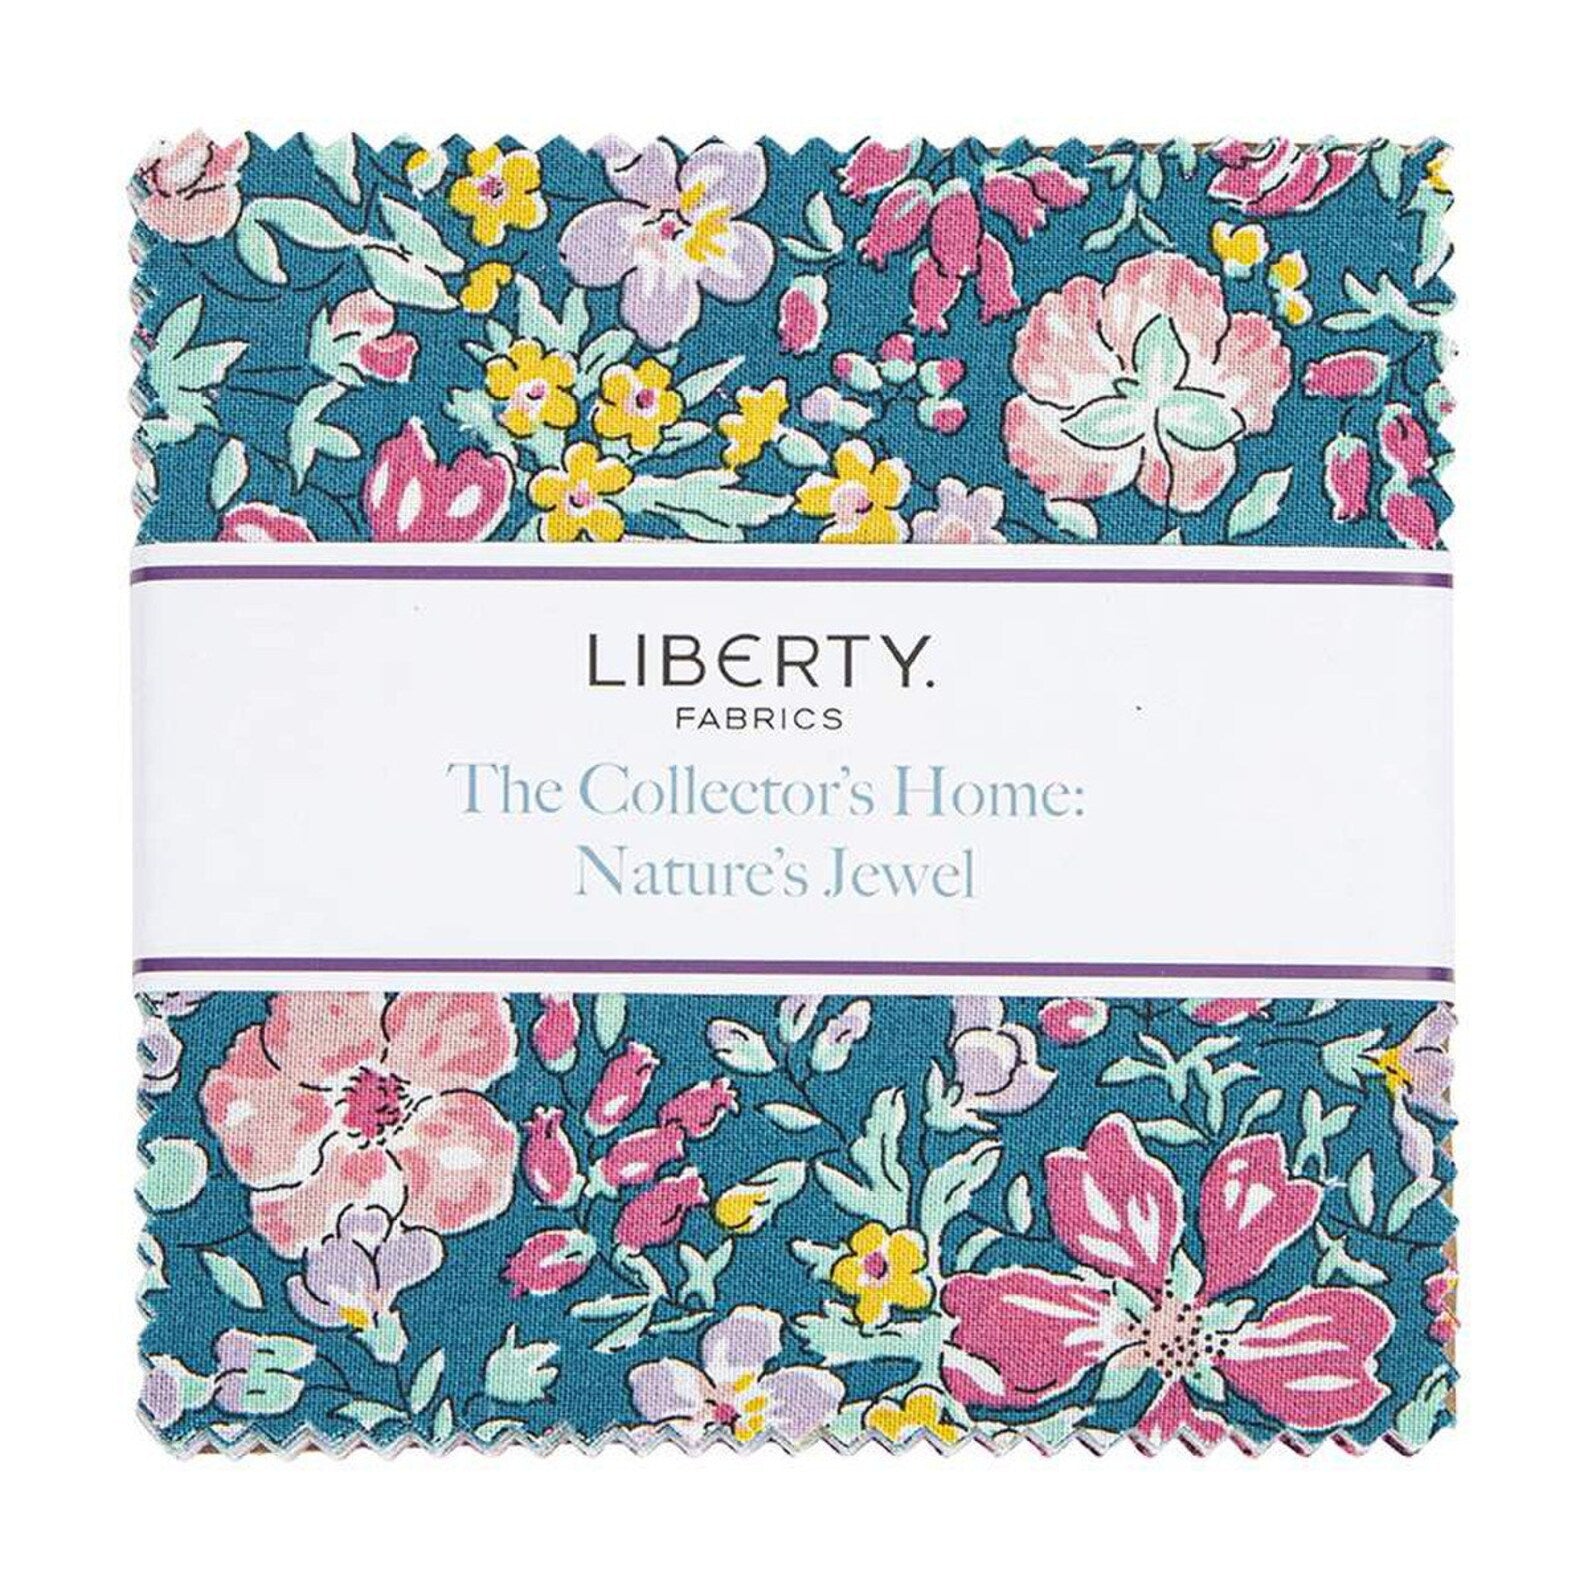 The Collector's Home Nature's Jewel by Liberty Fabrics